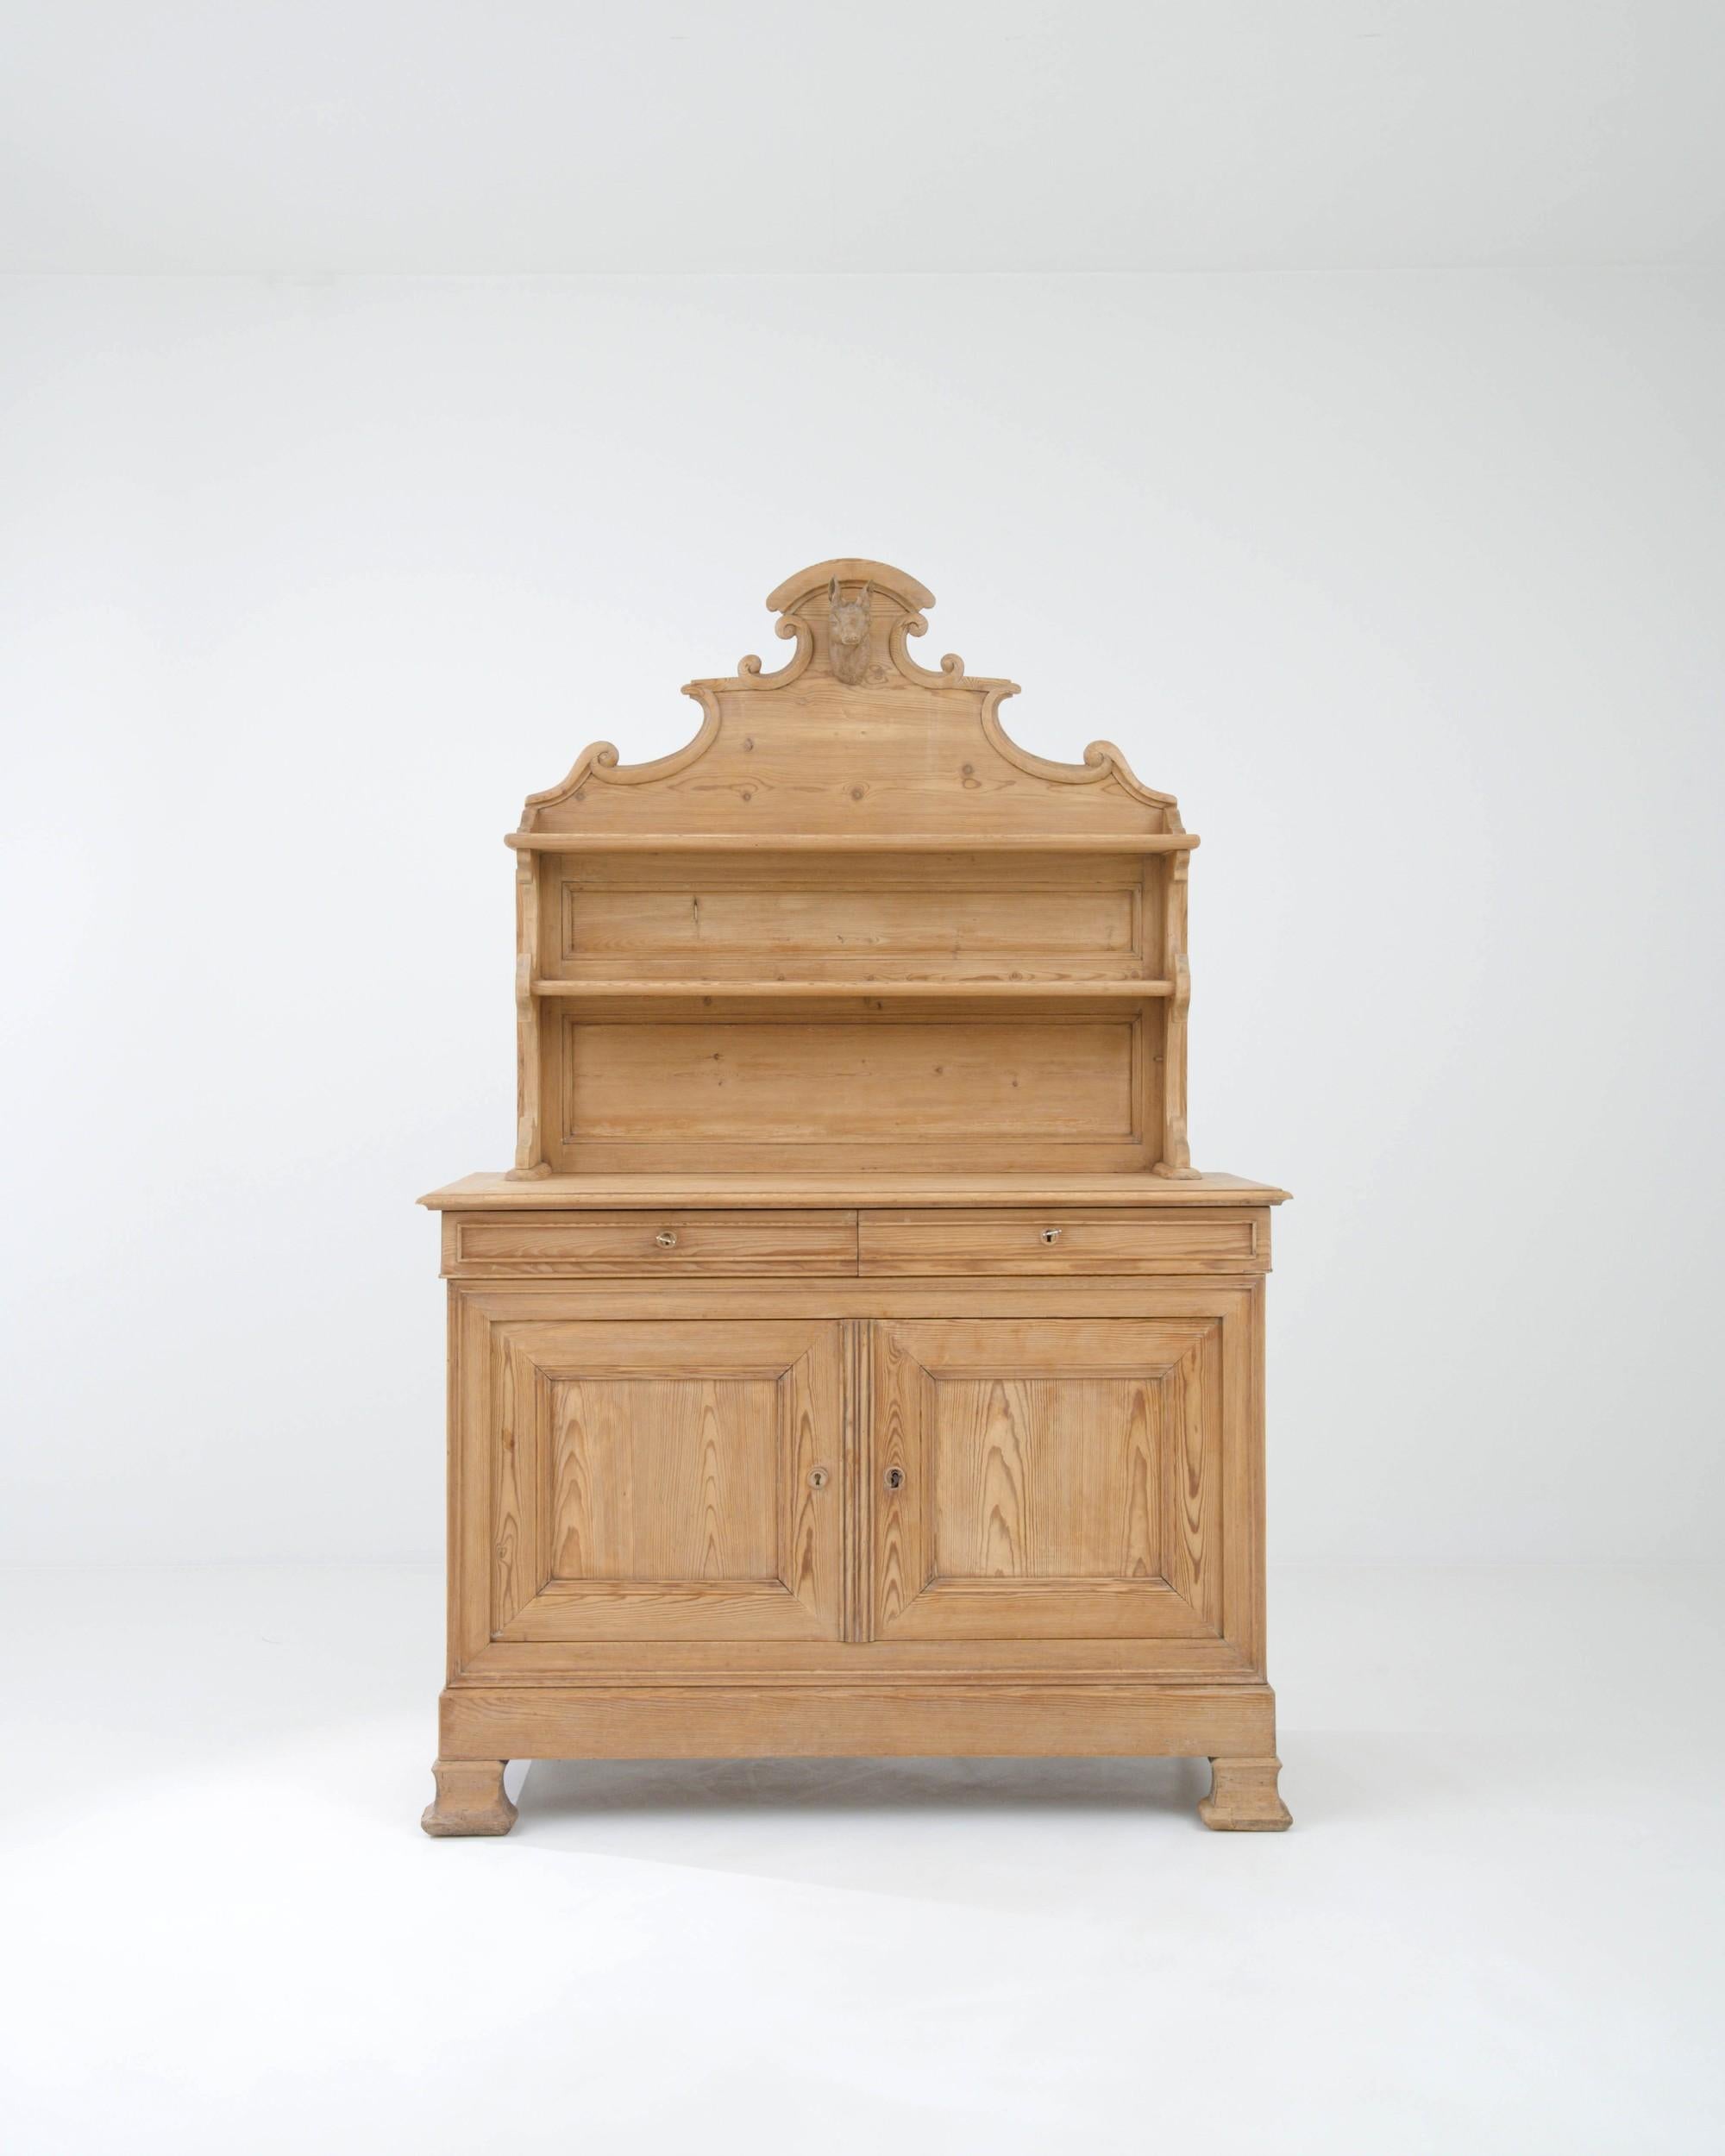 Masterful craftsmanship and a natural golden finish makes this antique wooden dresser a heirloom to be treasured for generations to come. Built in France in the 1800s, the design combines a spacious lower cupboard with a set of upper shelves, which